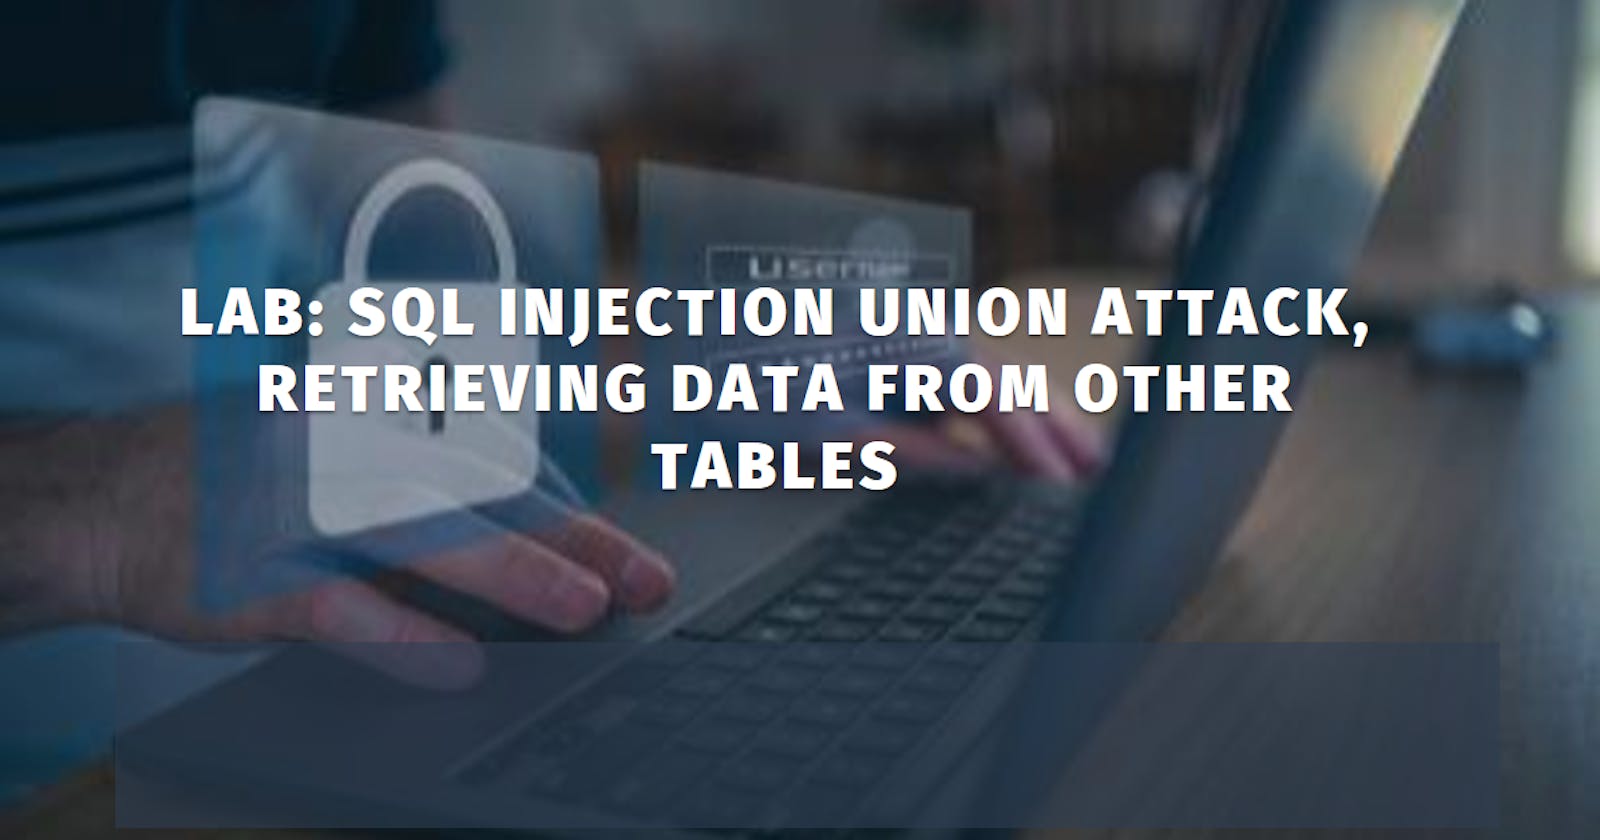 Lab: SQL injection UNION attack, retrieving data from other tables